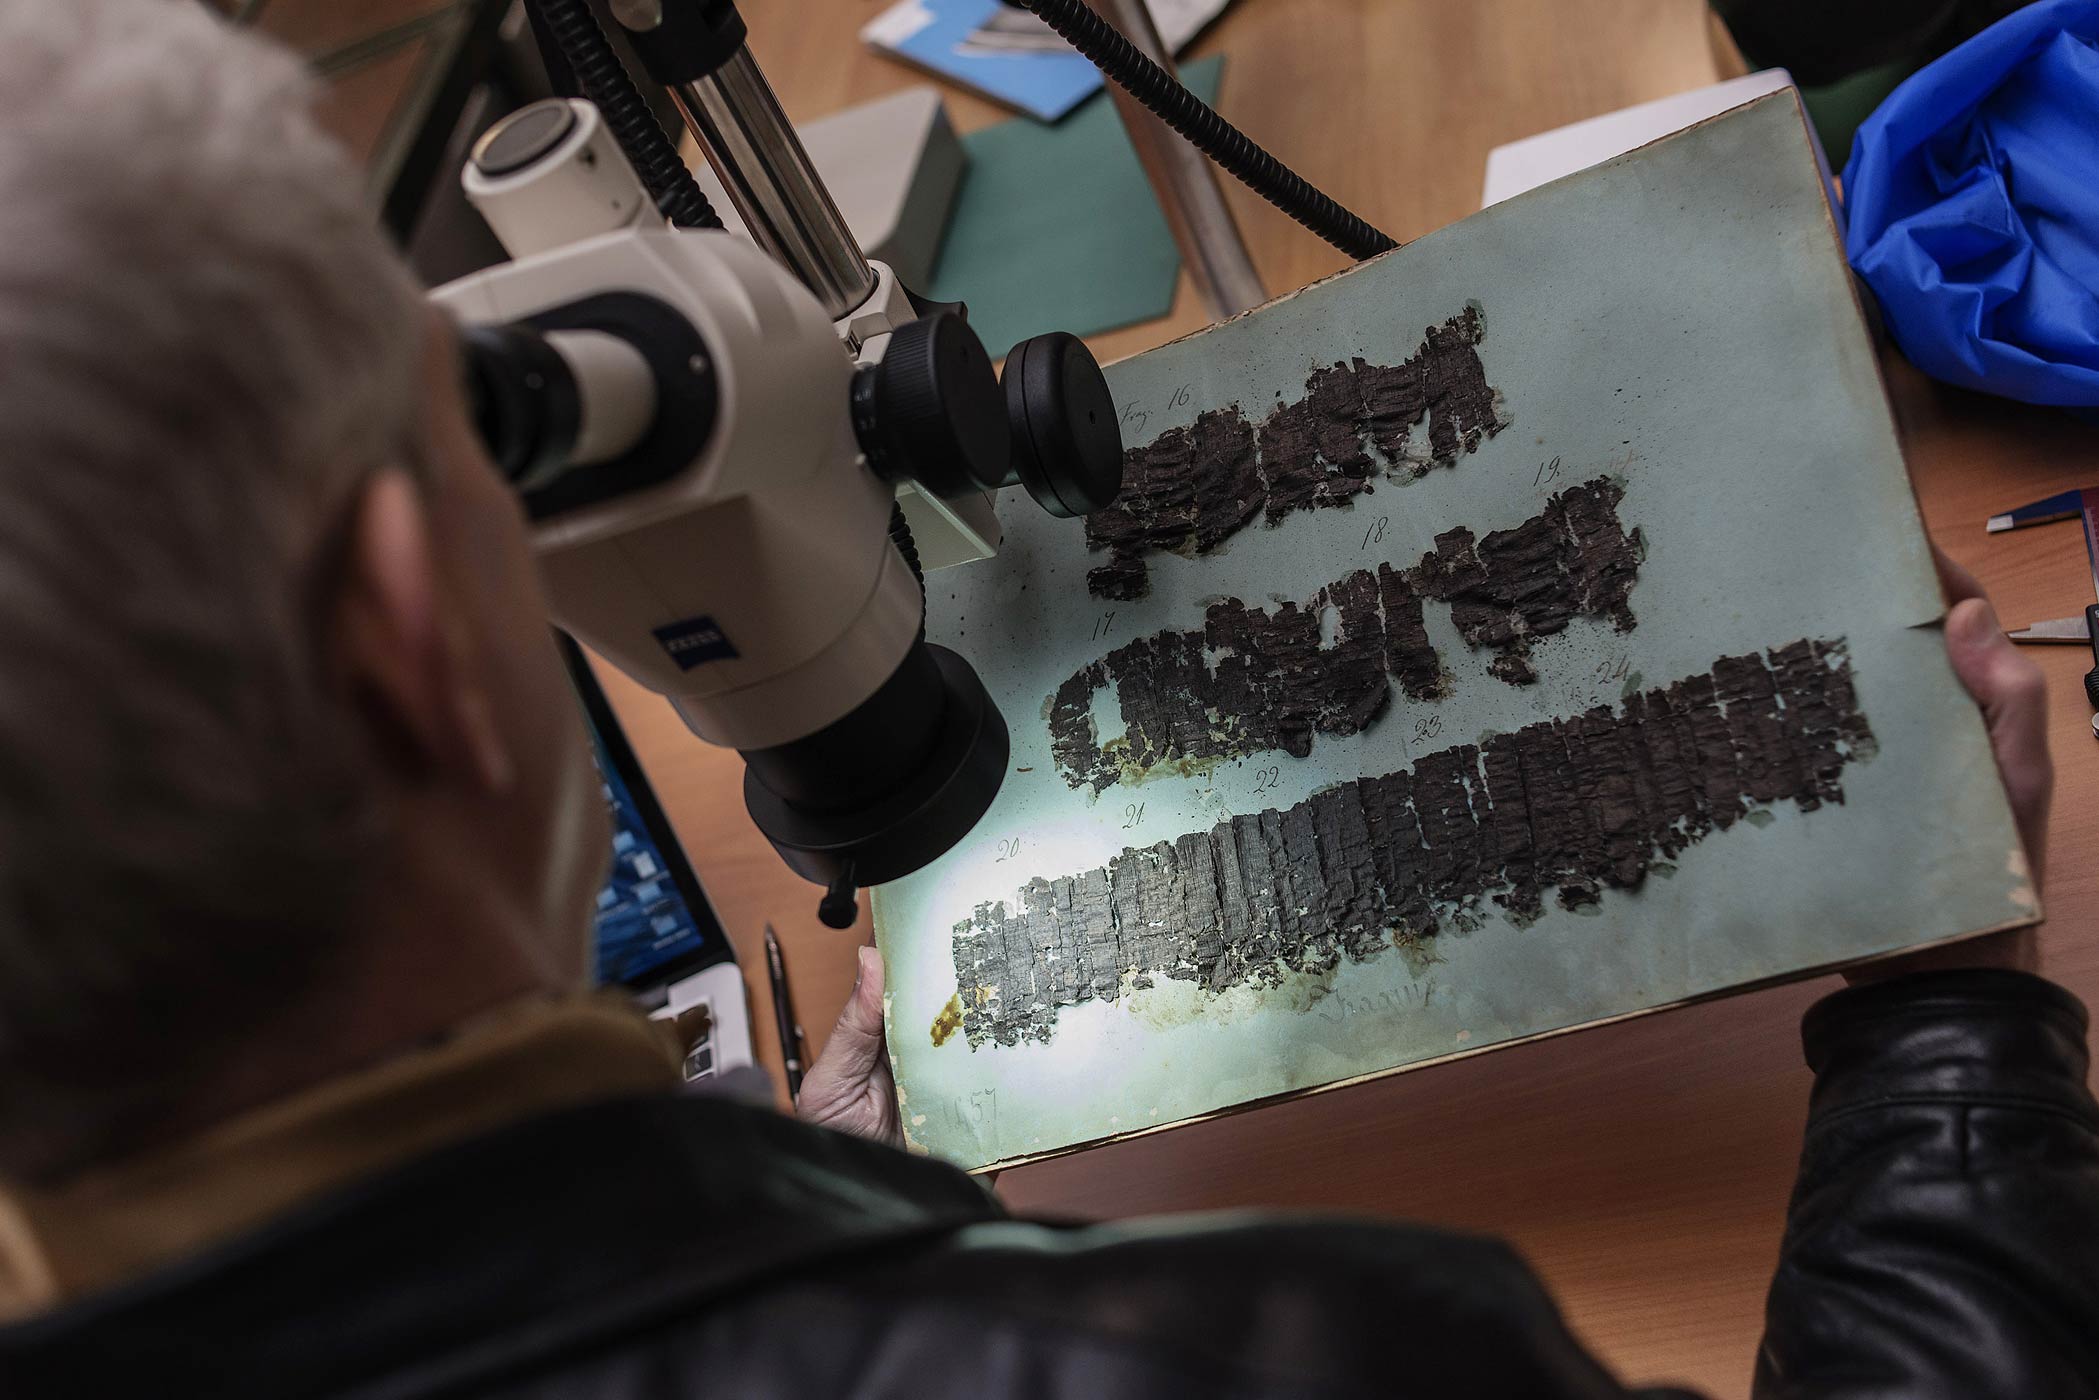 David Blank, professor of Classics from the University of California, looks through a microscope at an ancient papyrus at the Naples' National Library, Italy, Jan. 20, 2015. (Salvatore Laporta—AP)